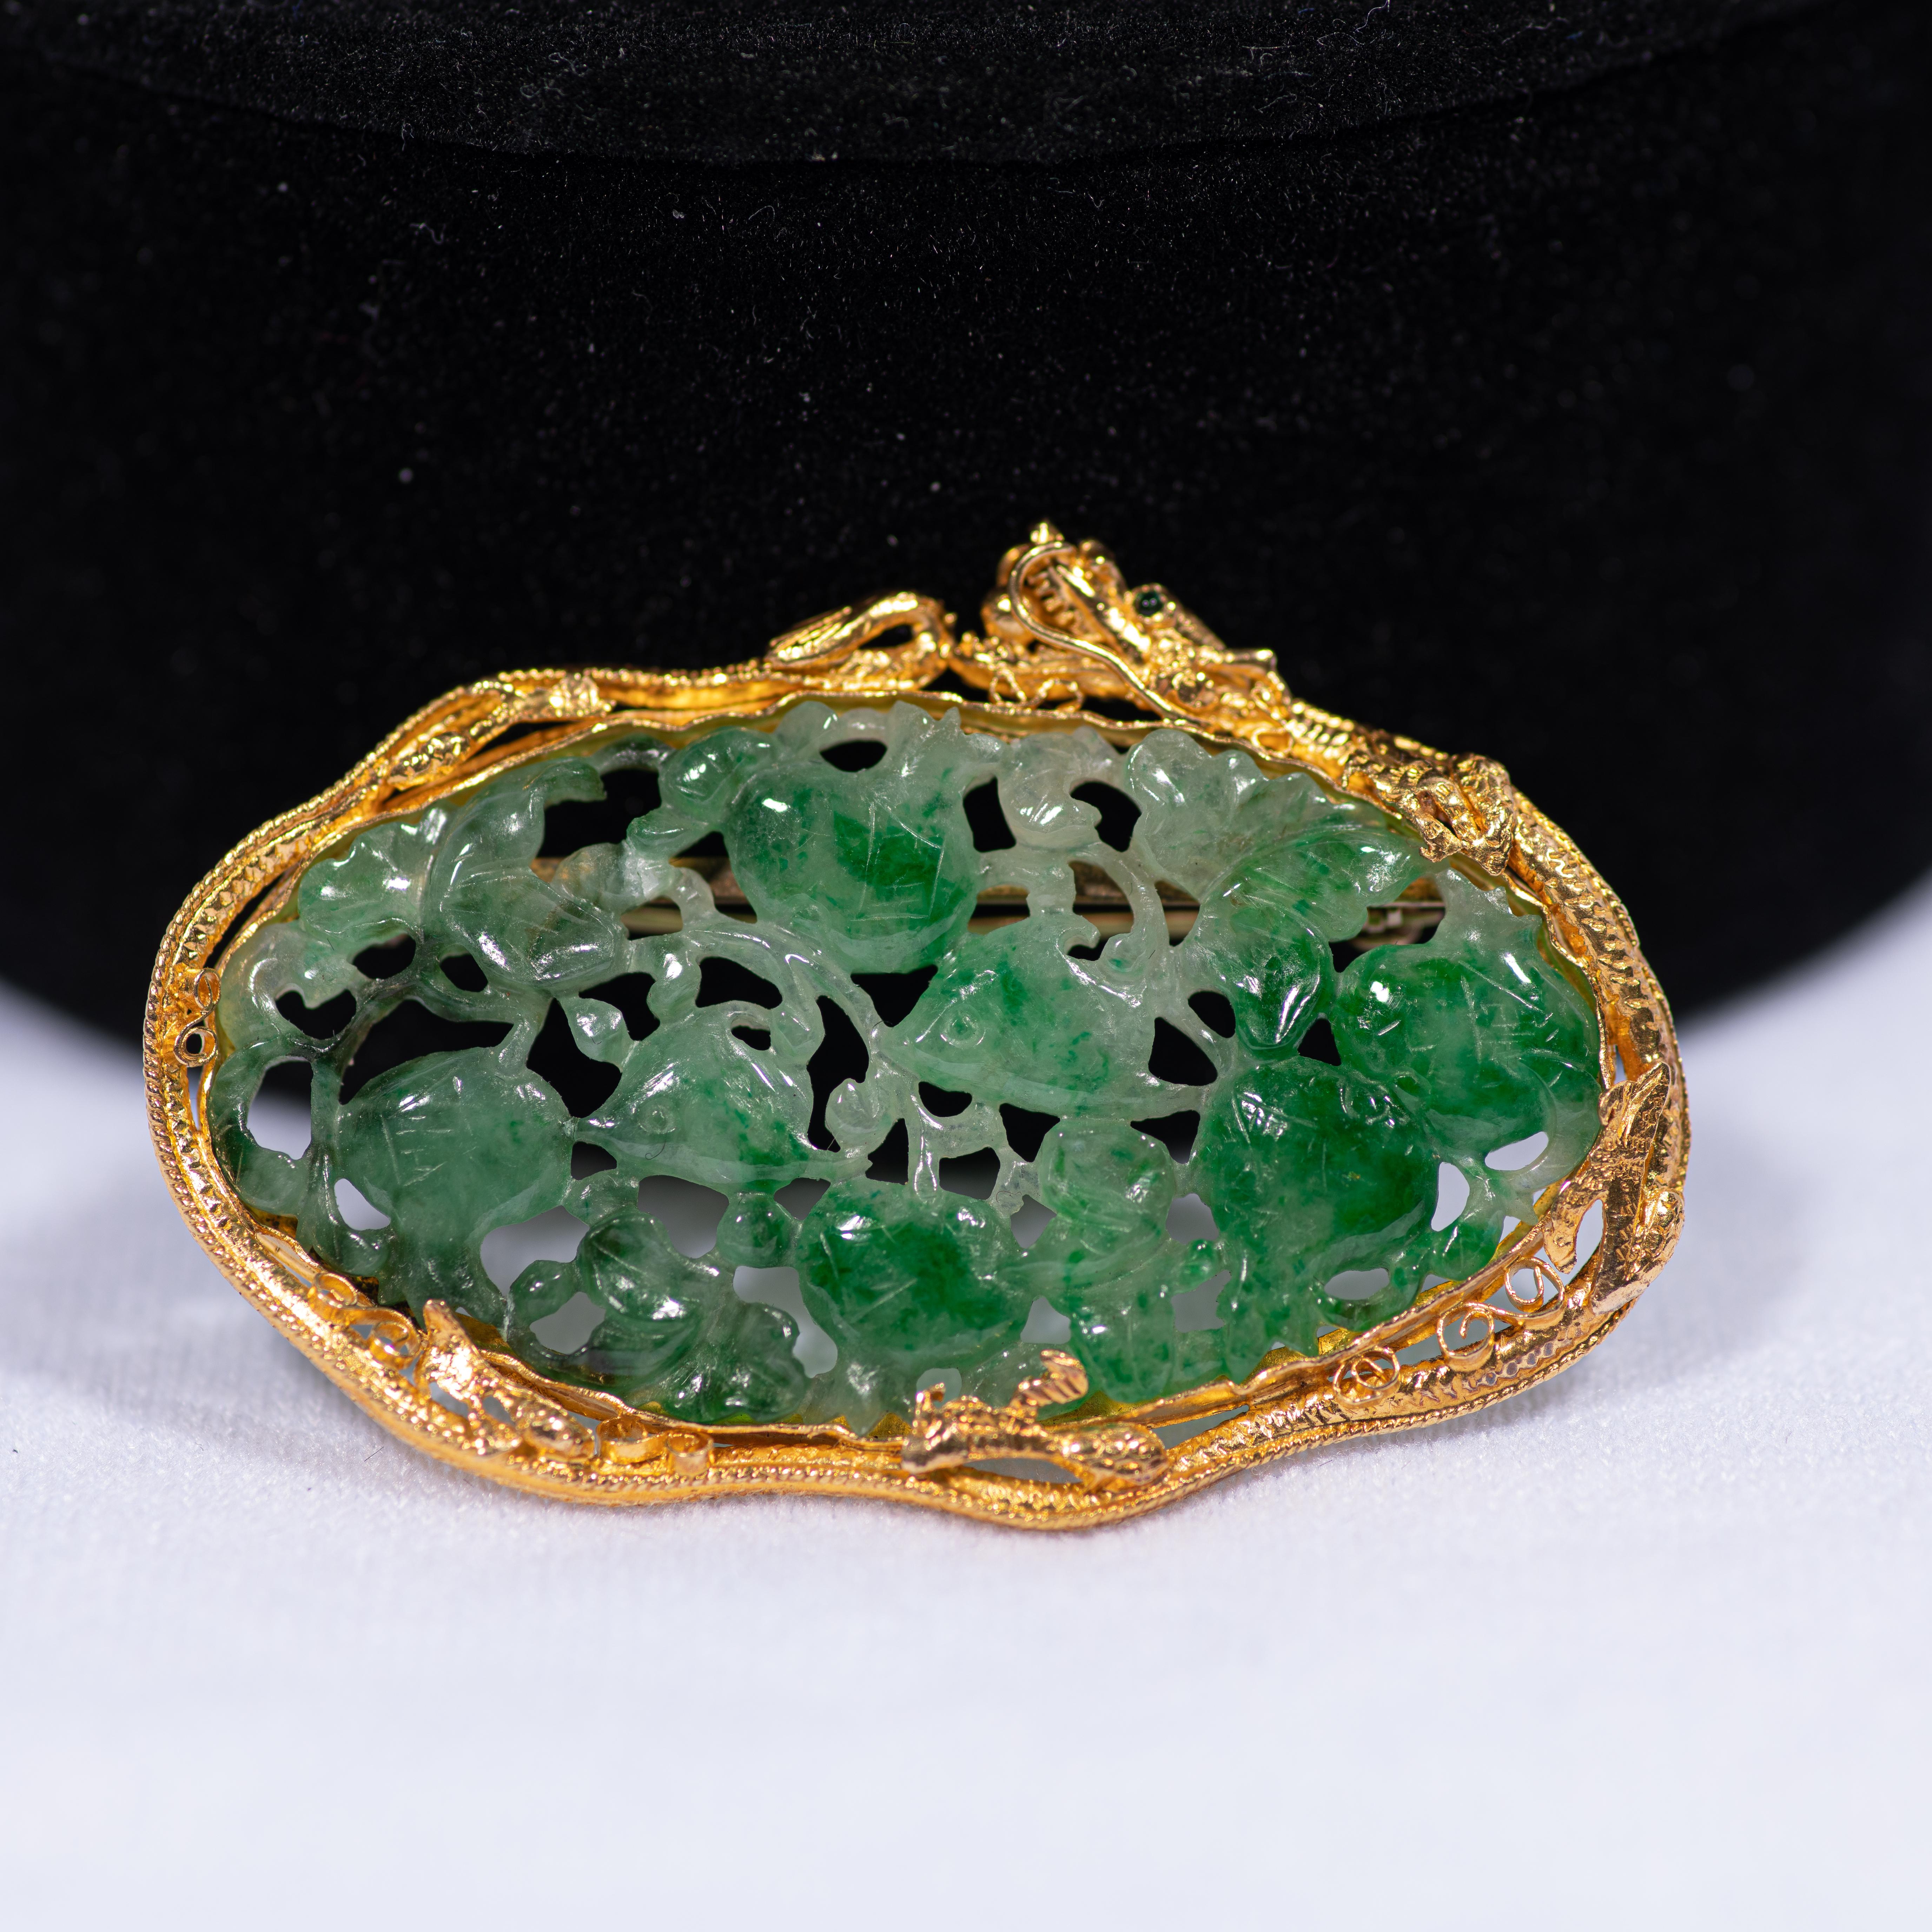 
A striking and gorgeous Chinese export brooch comprised of a luminous piece of carved and pierced jadeite in a 22k yellow gold setting shaped as a dragon with emerald eyes, China (probably Shanghai), circa 1930's. 

The jadeite of a mottled green